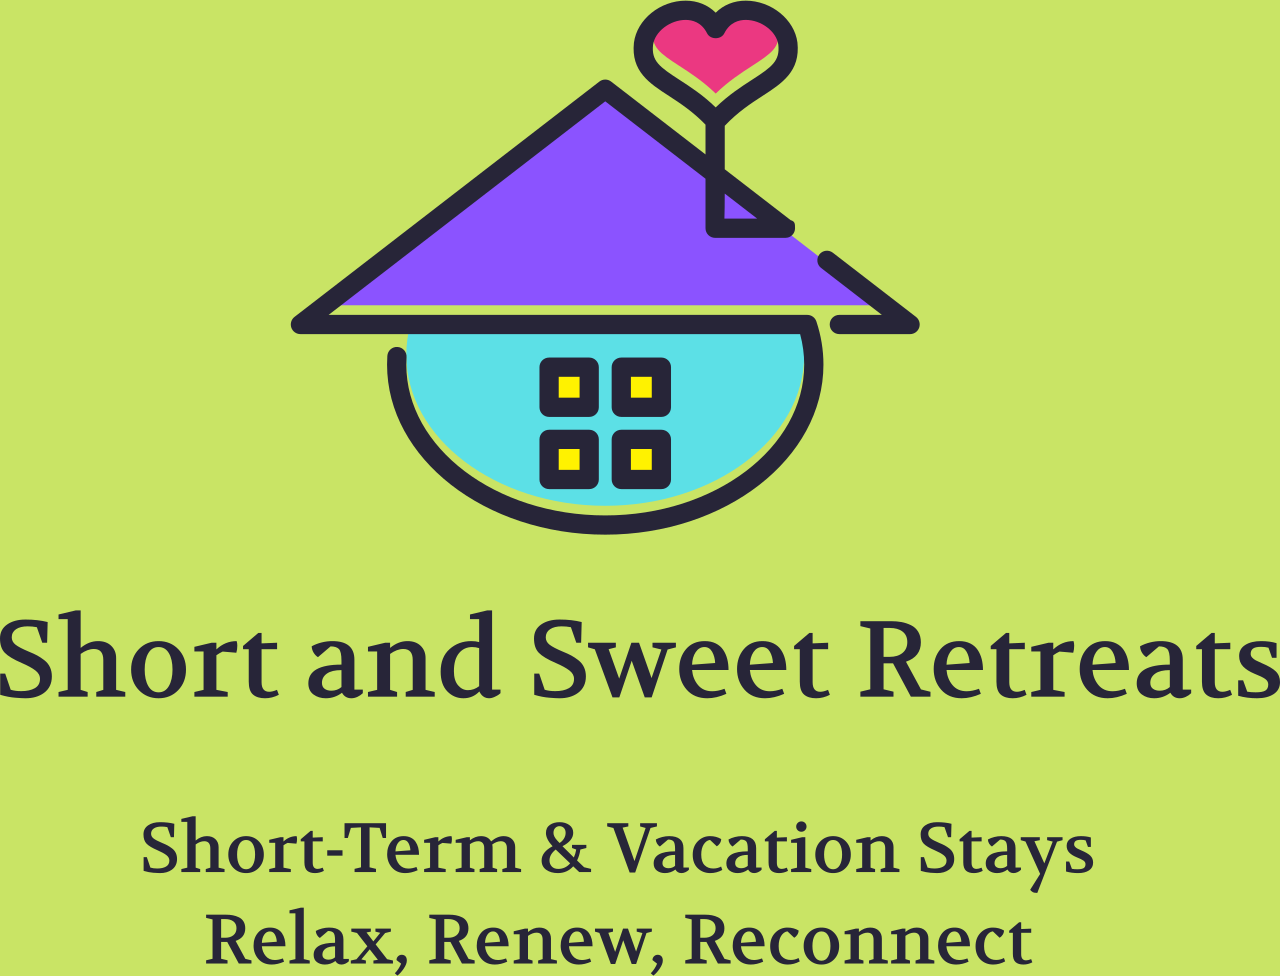 Short and Sweet Retreats's web page